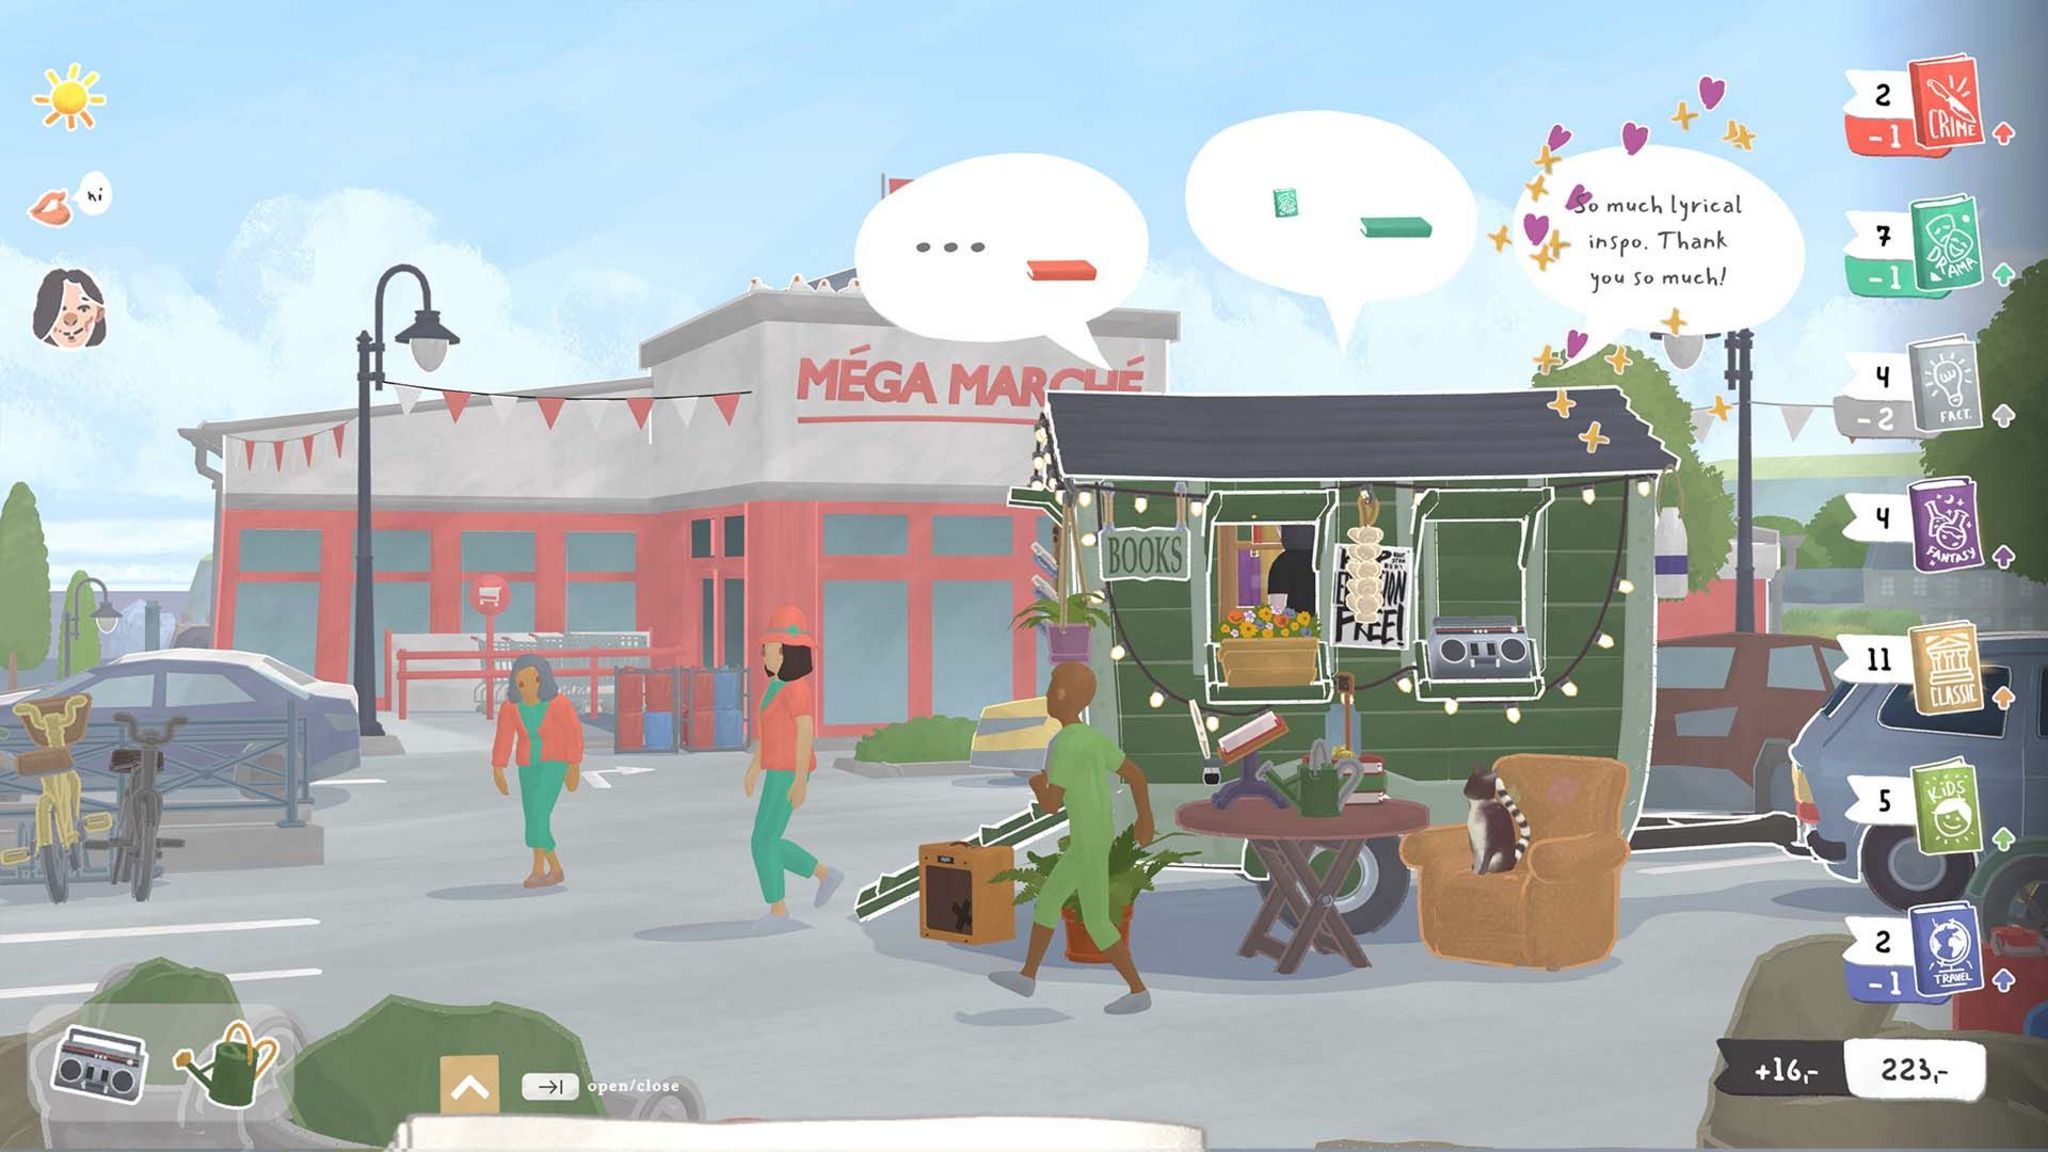 A painterly style screenshot from Tiny Bookshop, showing a small wooden caravan erected in the car park of a supermarket. Customers mill about in front of the stall and a cat sits on an armchair in front of it. On the screen there are various icons denoting different books and the number of each the player has sold.